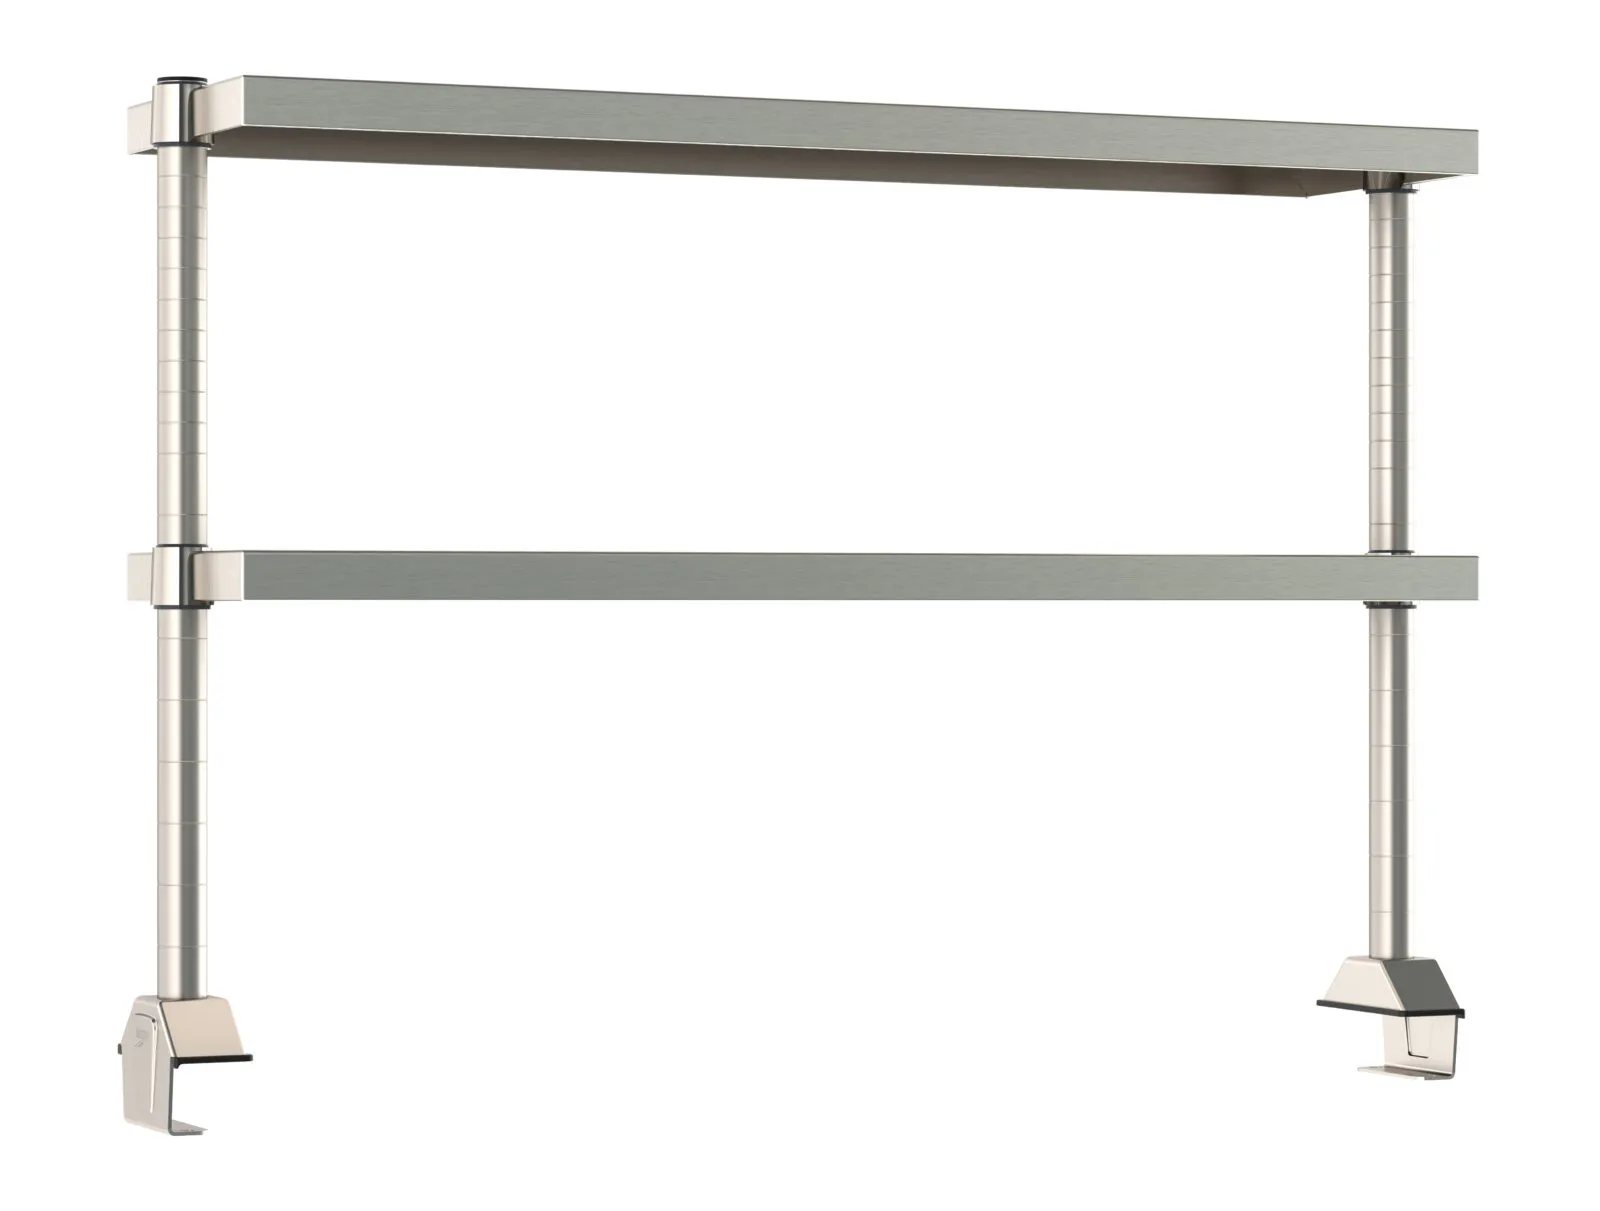 Stainless Steel Metro Tableworx 2 Center Cantilever Stainless Steel Solid Shelf Risers